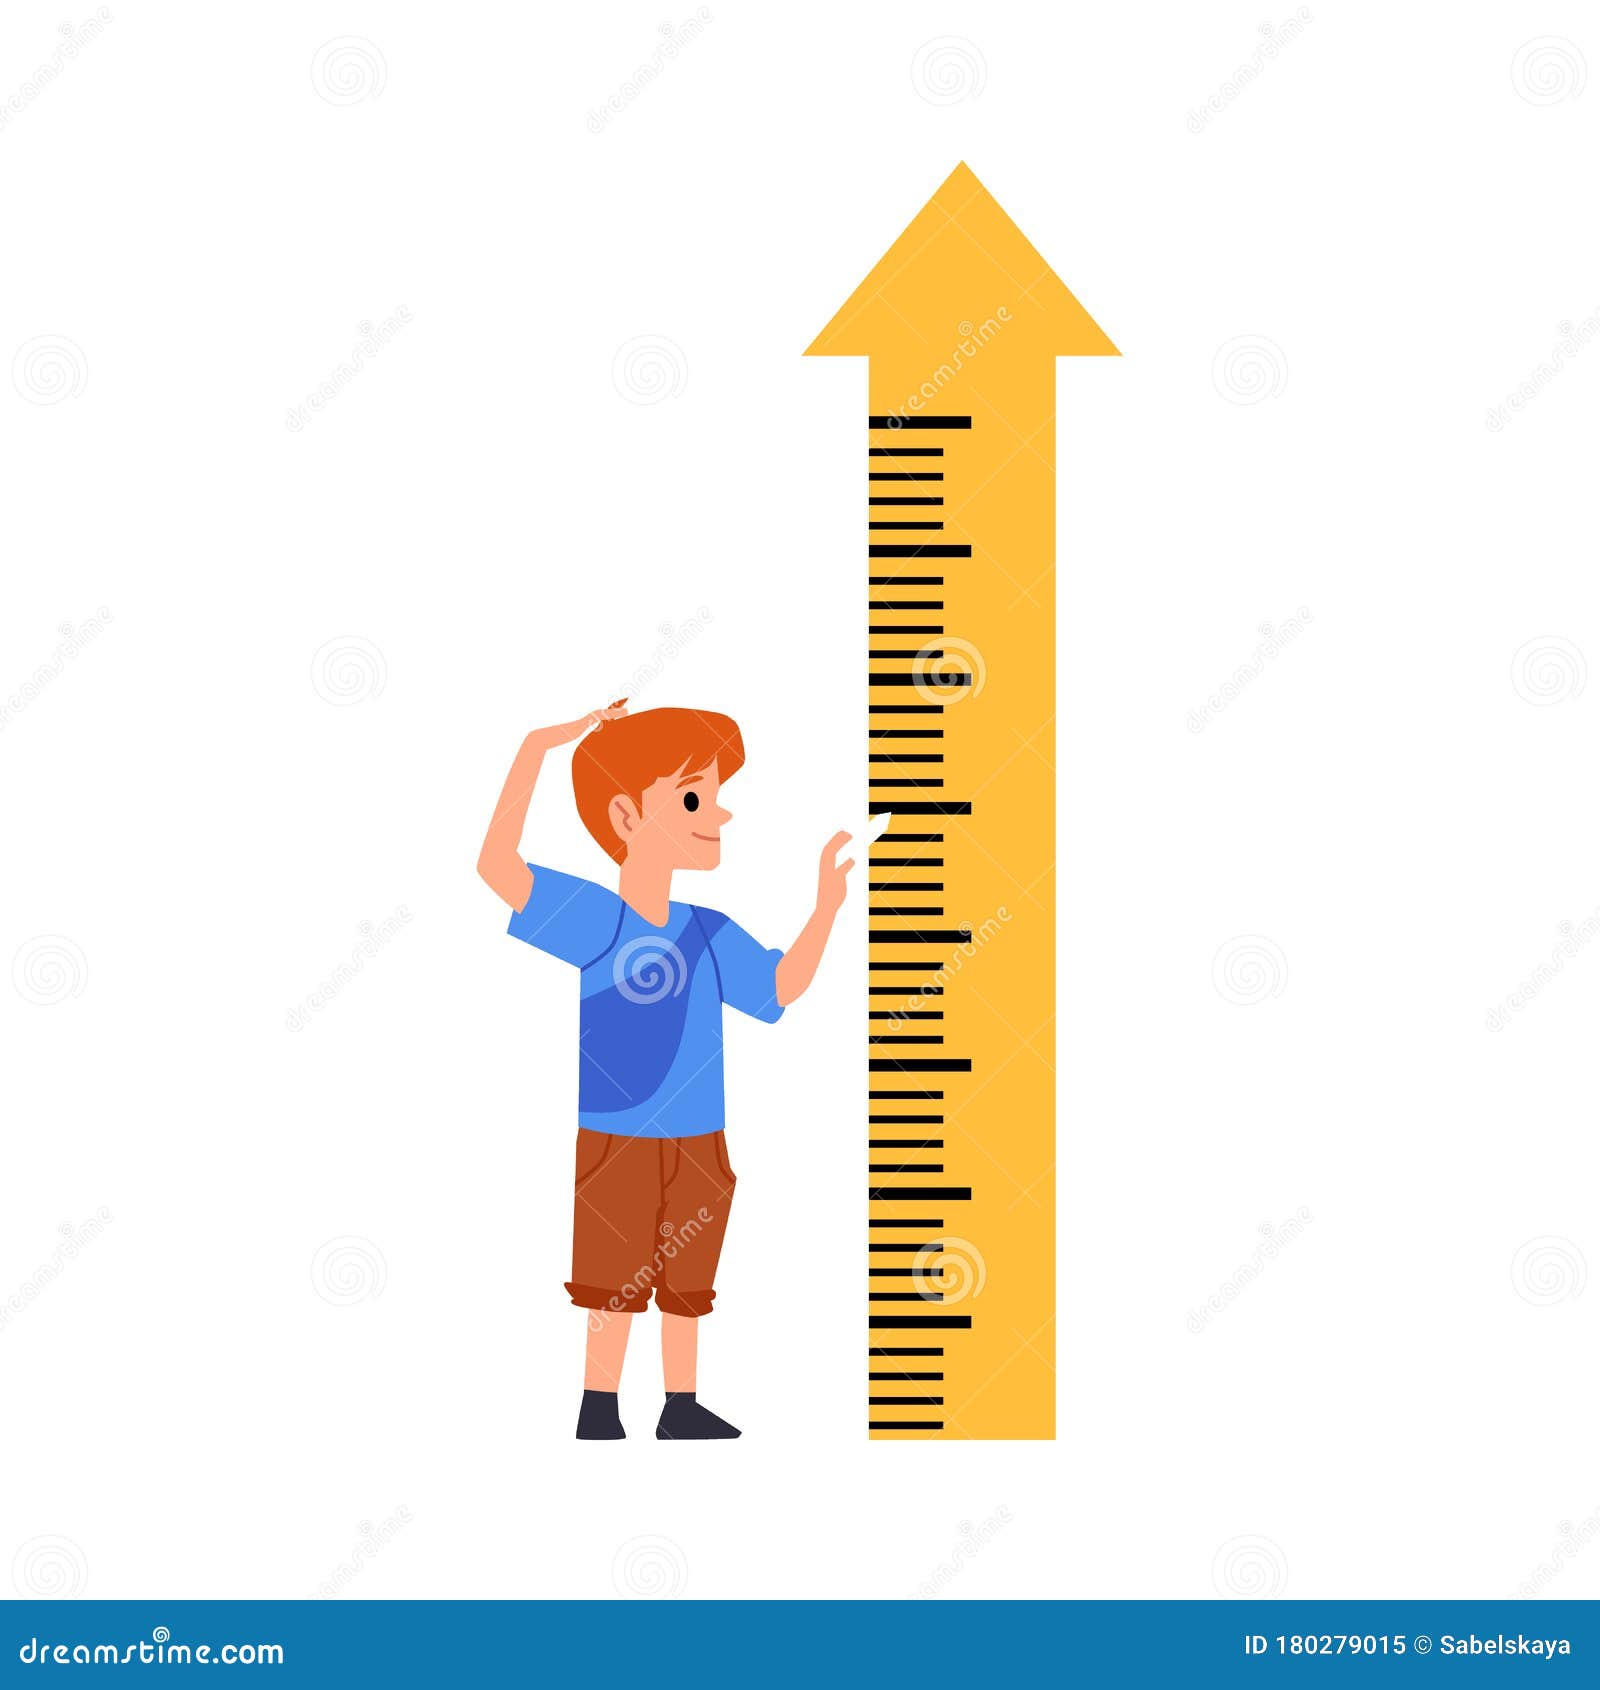 Virtual care: How to accurately measure your child's height and